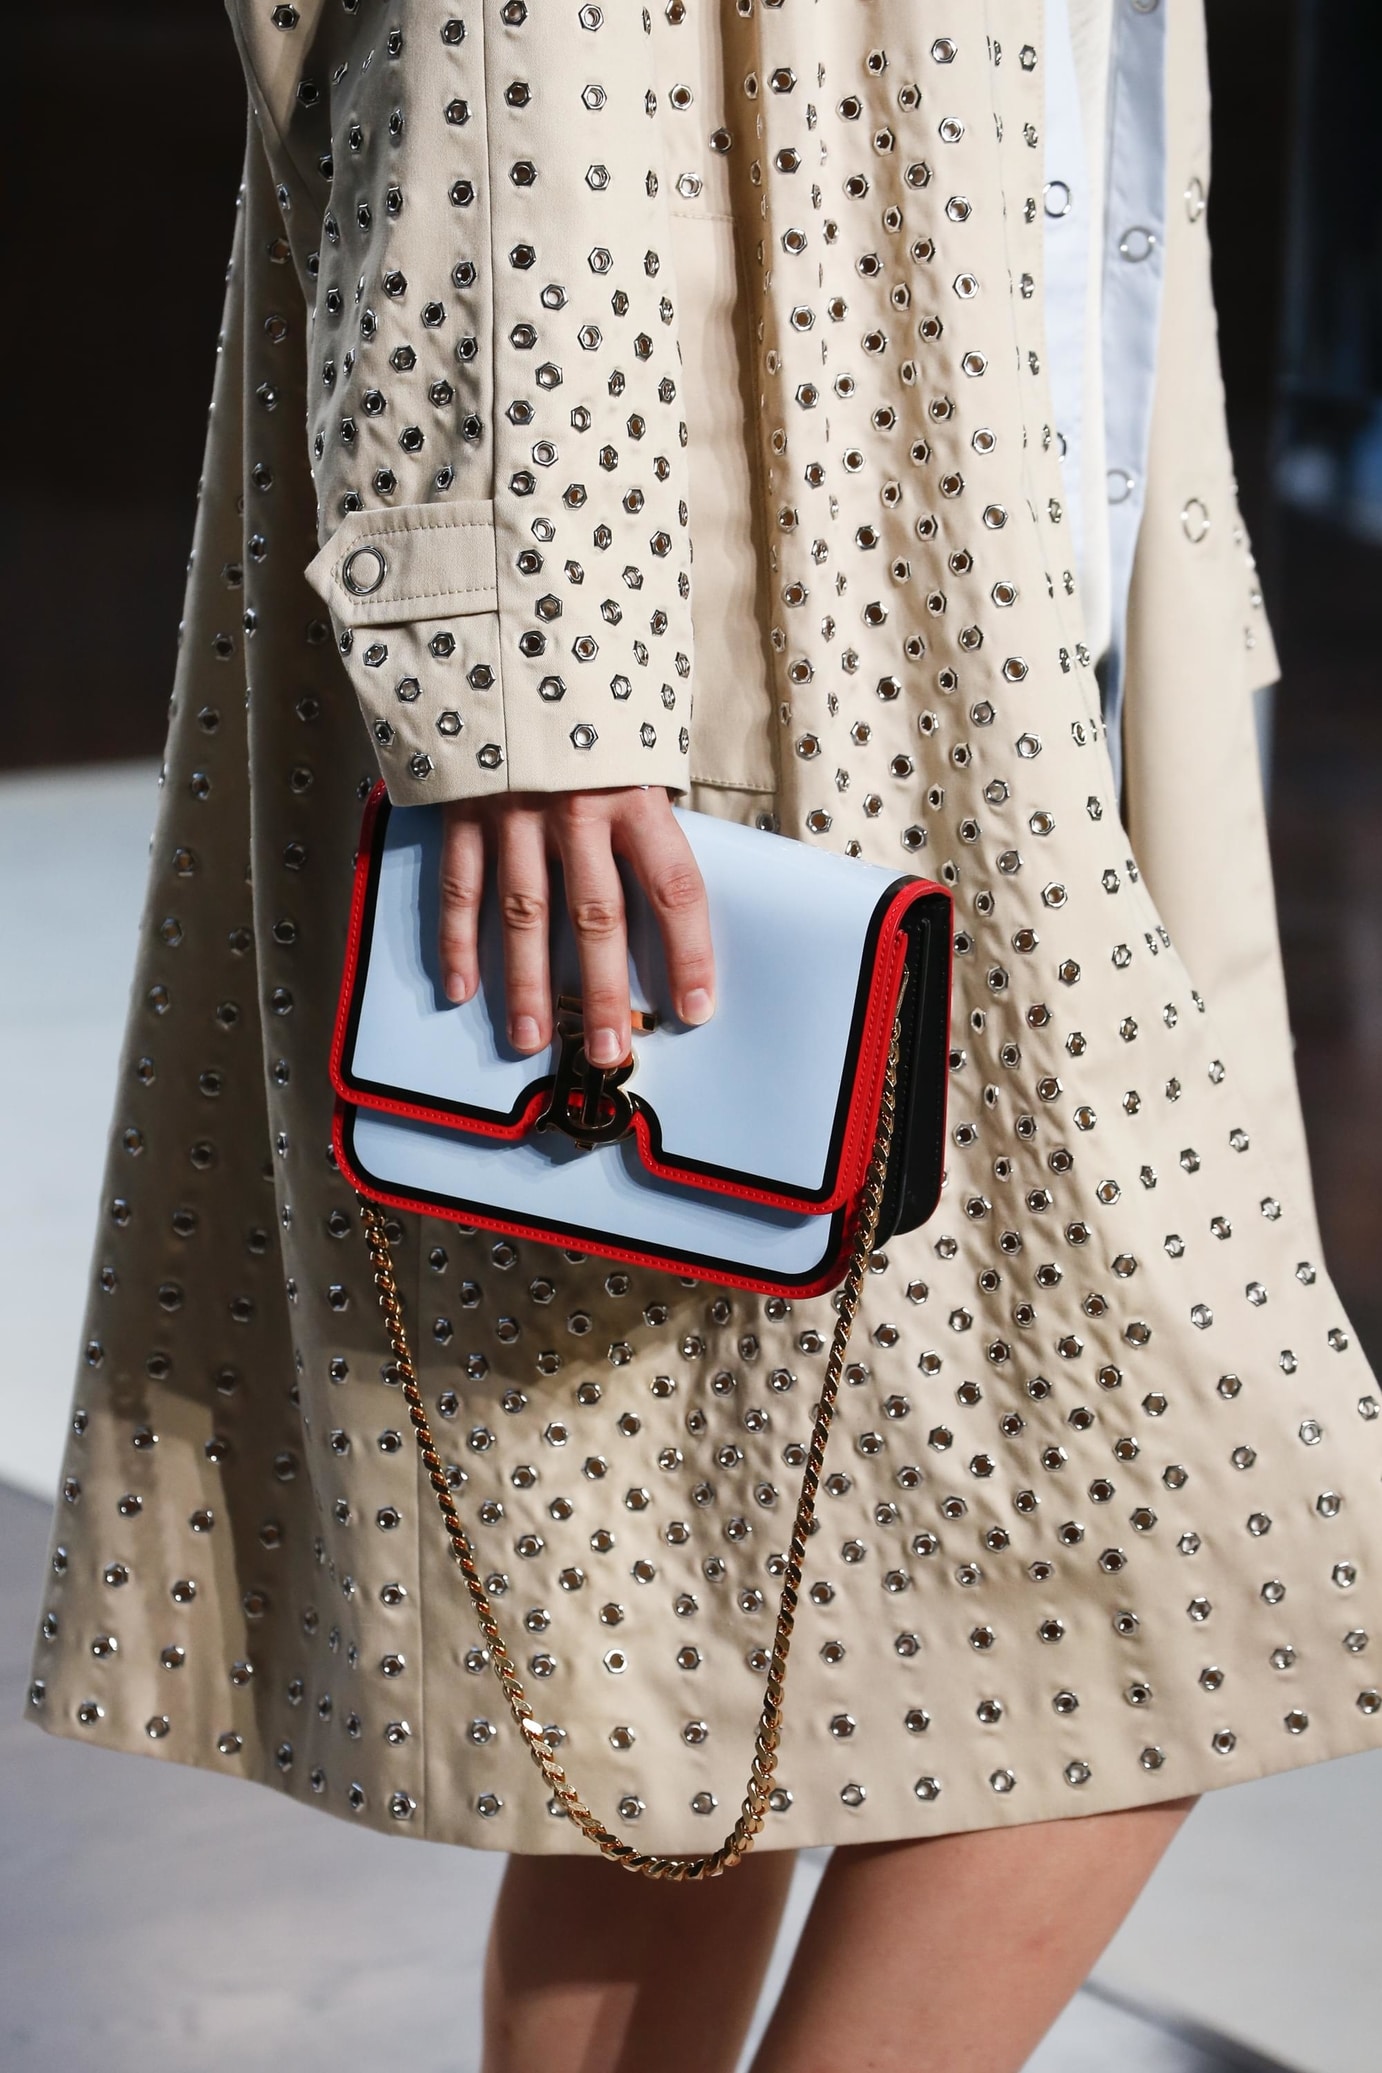 Burberry Spring/Summer 2019 Runway Bag Collection - Spotted Fashion